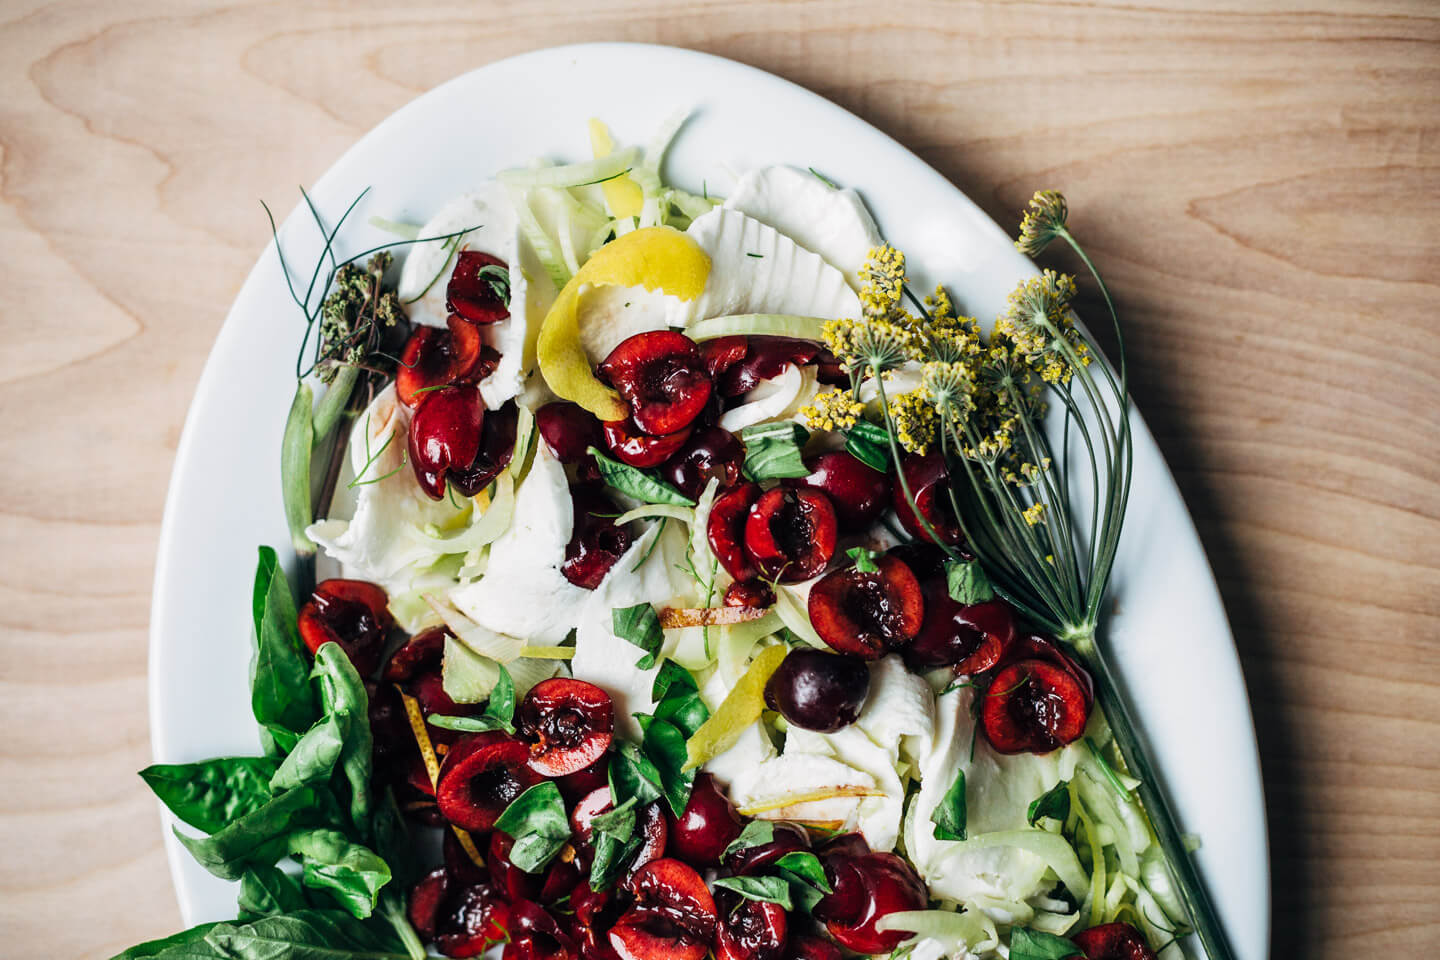 Shaved fennel and sweet Bing cherry Caprese salad